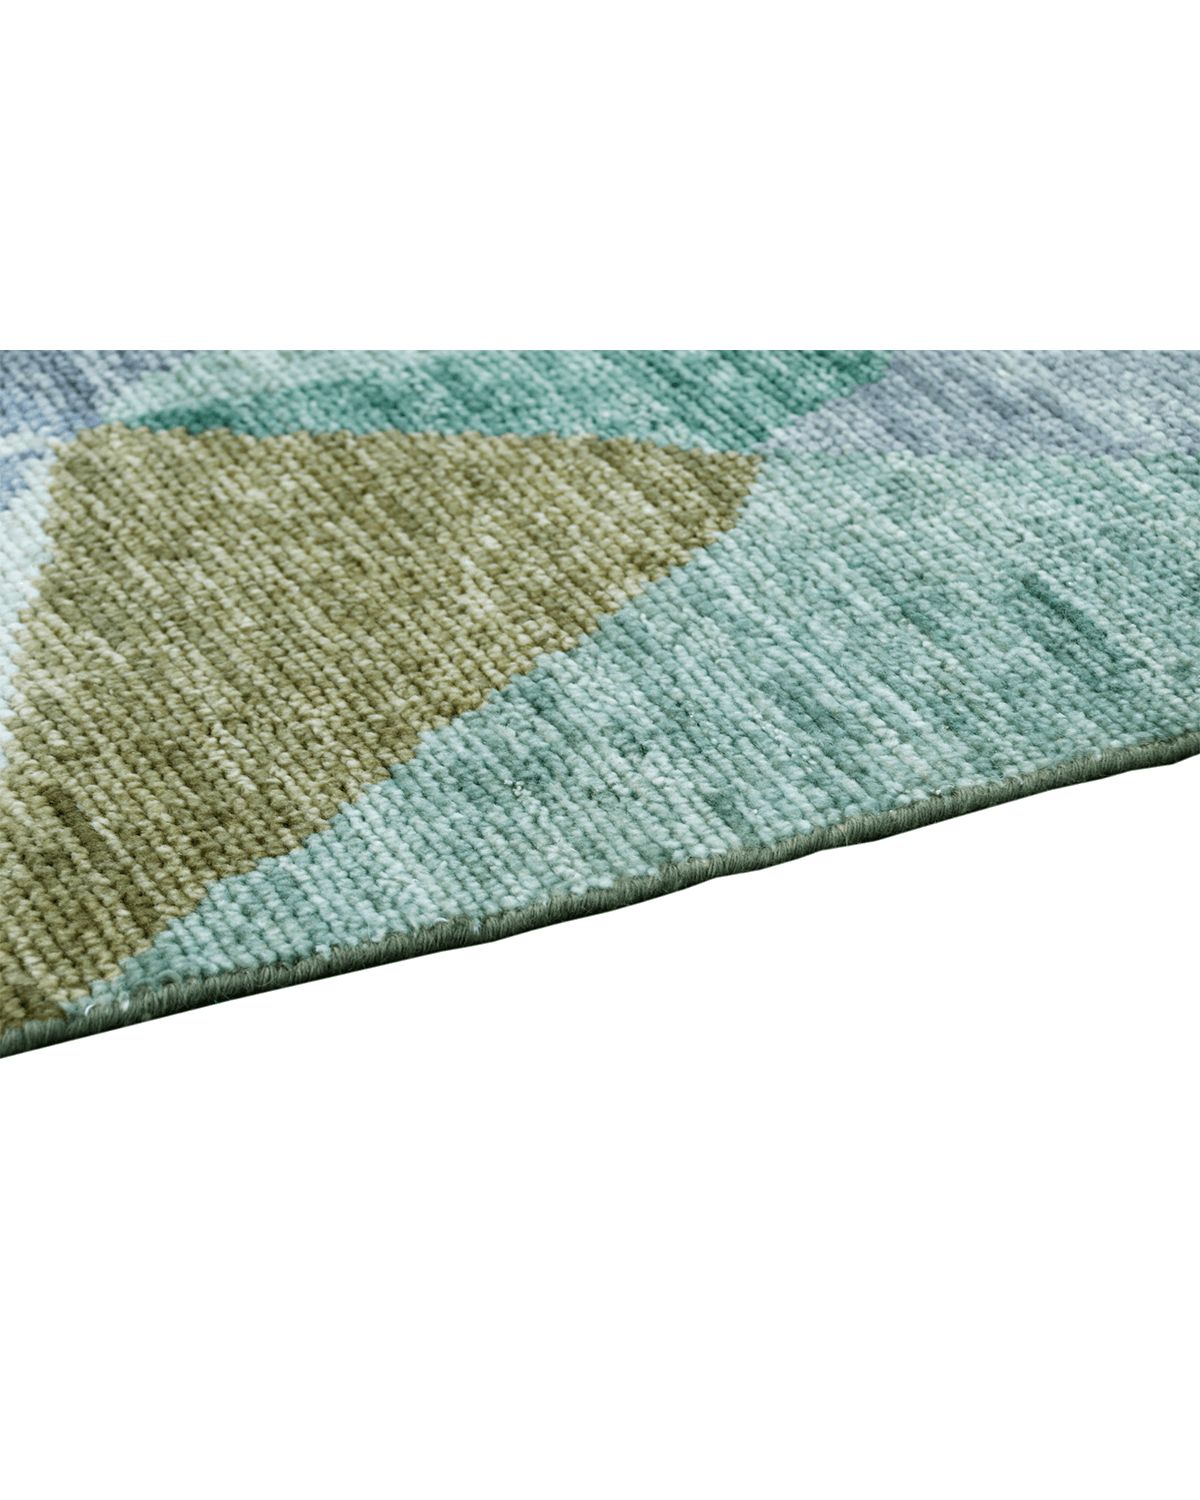 Hand-knotted Modern Rug (CAD2022-52)